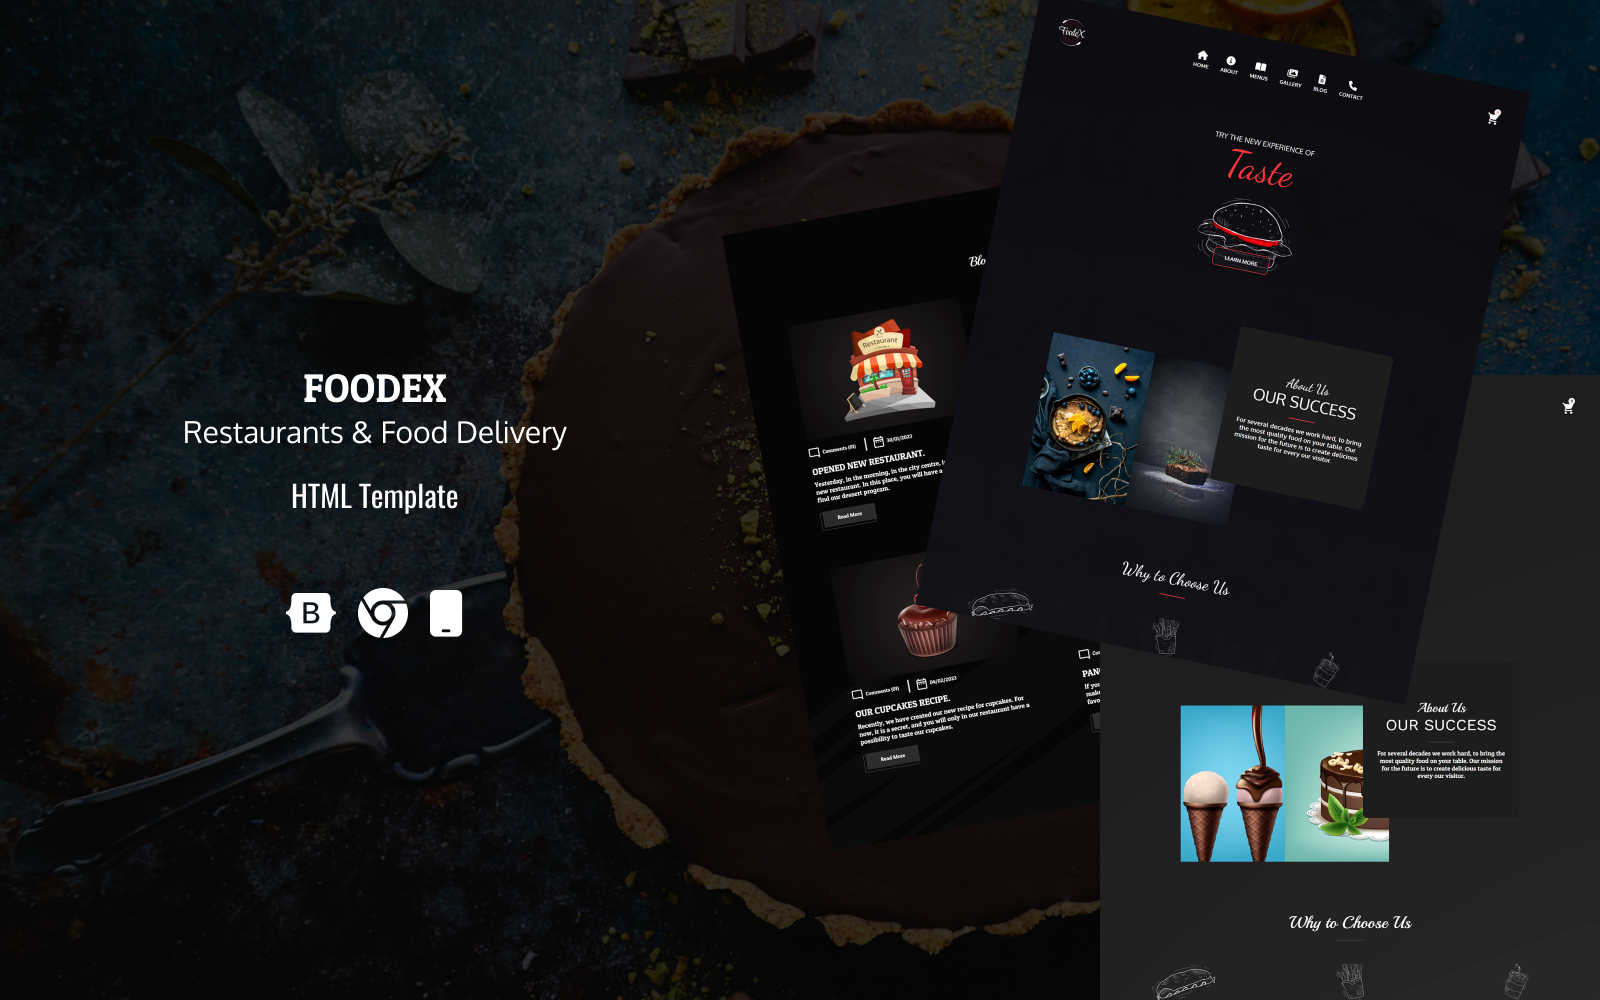 FoodeX - Restaurants - Food Delivery Companies - HTML Web Template